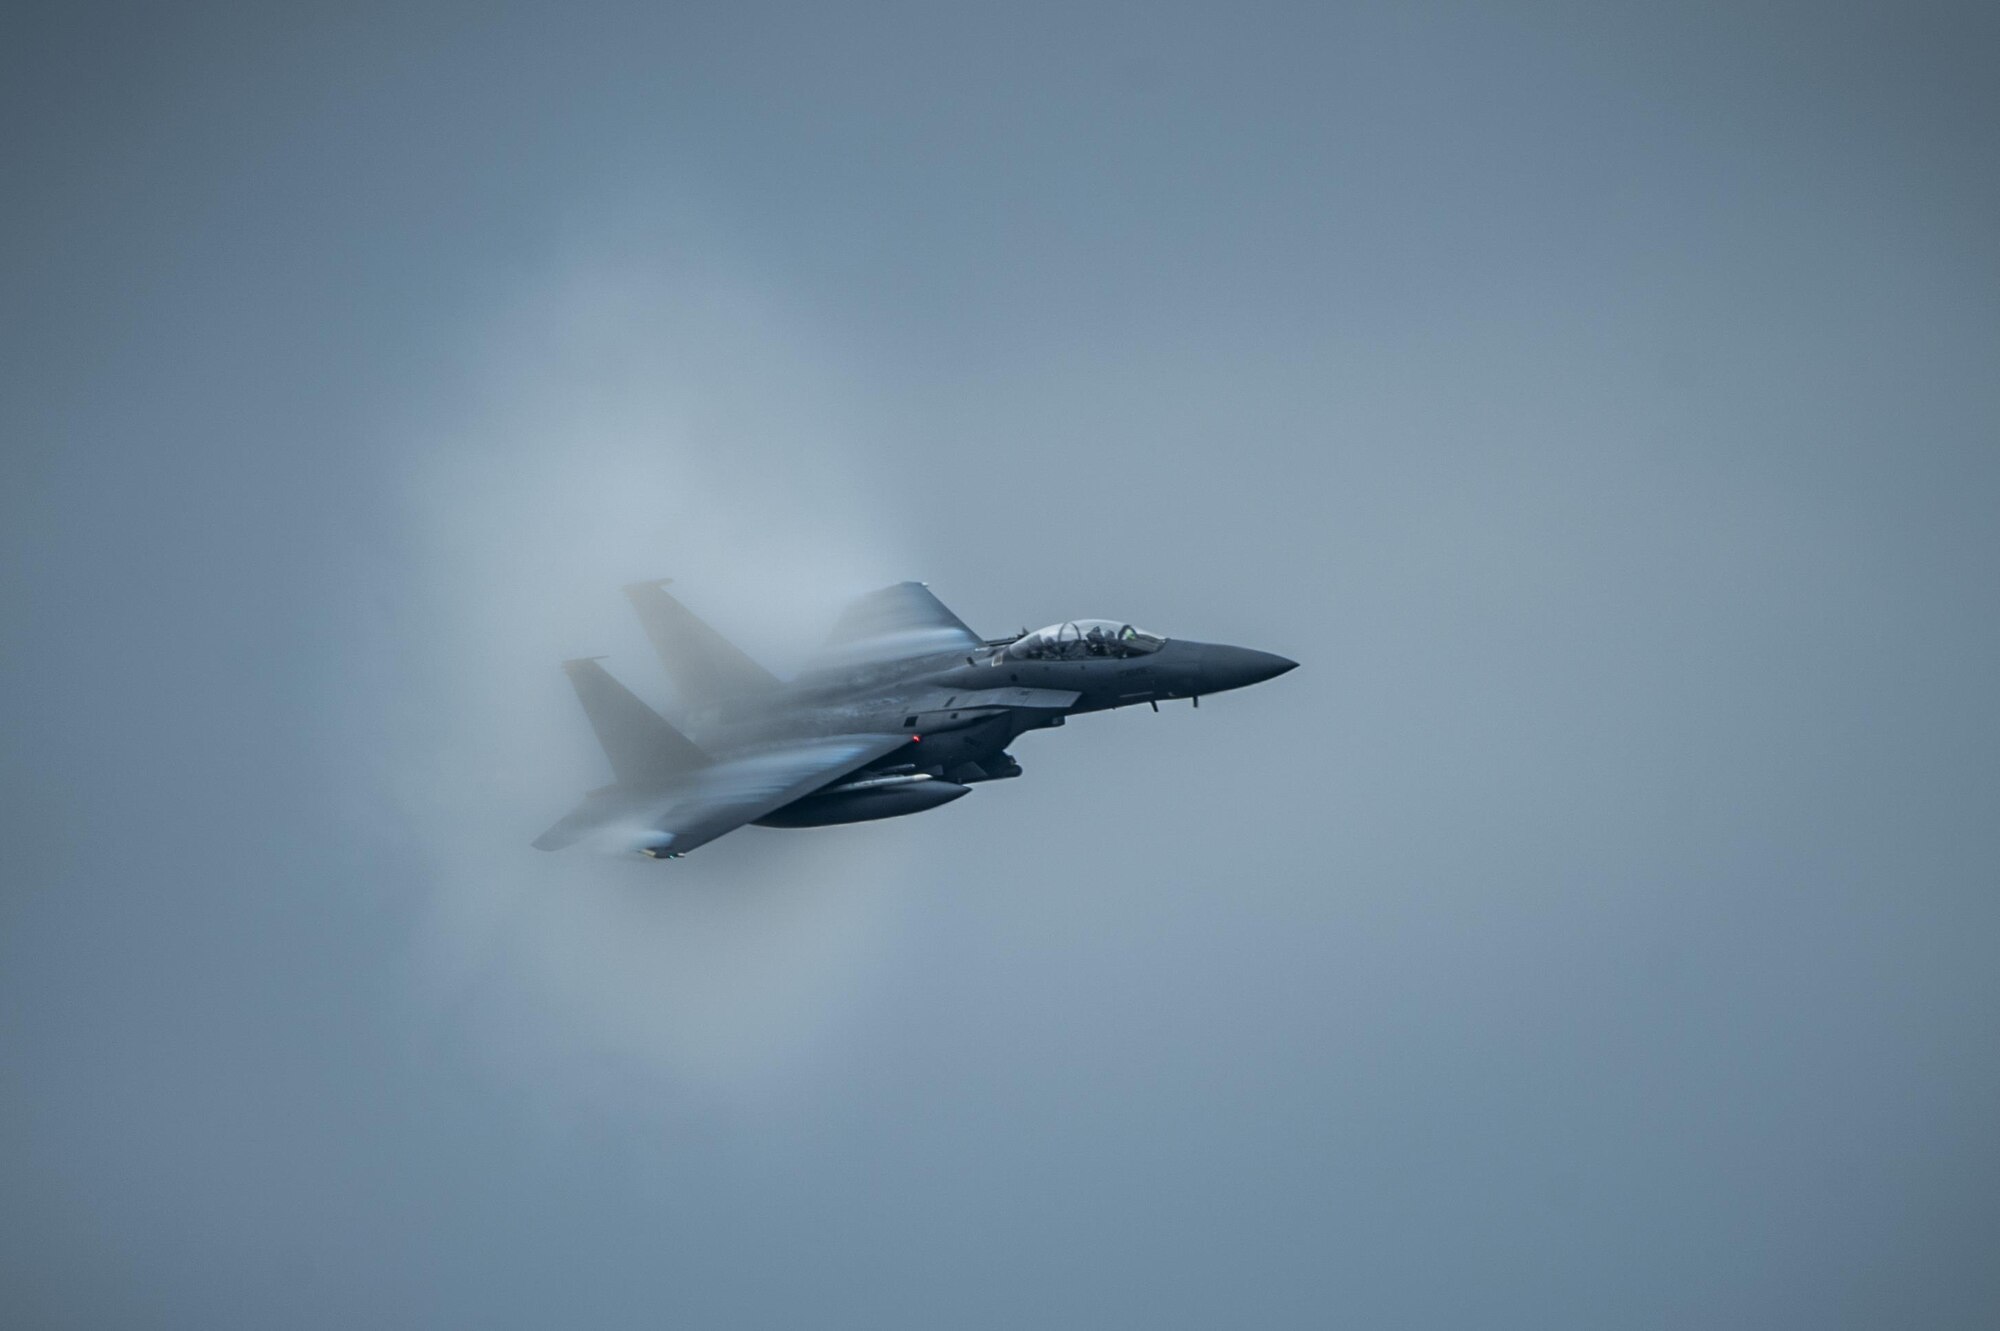 An F-15E Strike Eagle flies during a training exercise, March 4, 2016, at Moody Air Force Base, Ga. During the training, the aircraft conducted tactical air and ground maneuvers, as well as weapons training. (U.S. Air Force photo by Airman 1st Class Lauren M. Johnson/Released)